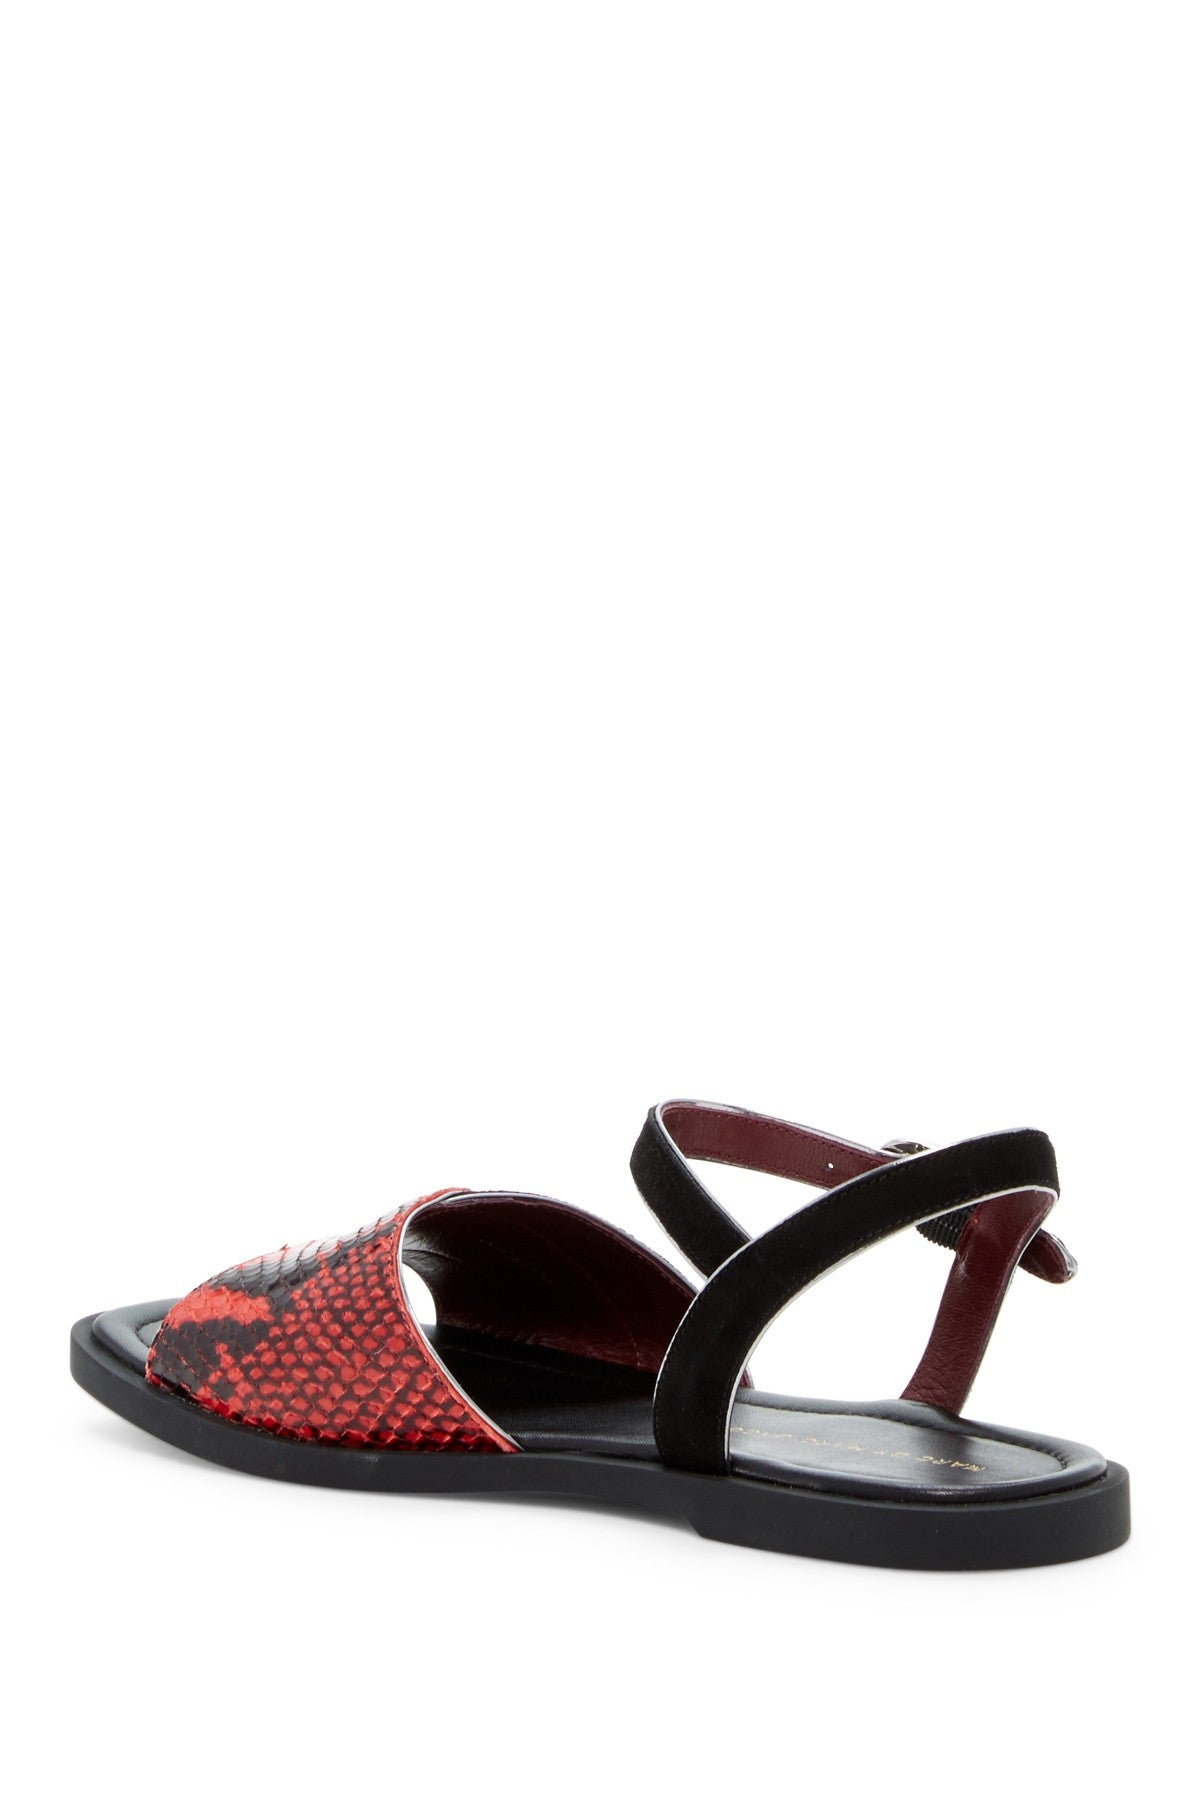 Marc by Marc Jacobs Womens M9000661 Jodie Red Black Marc Jacobs Sandal